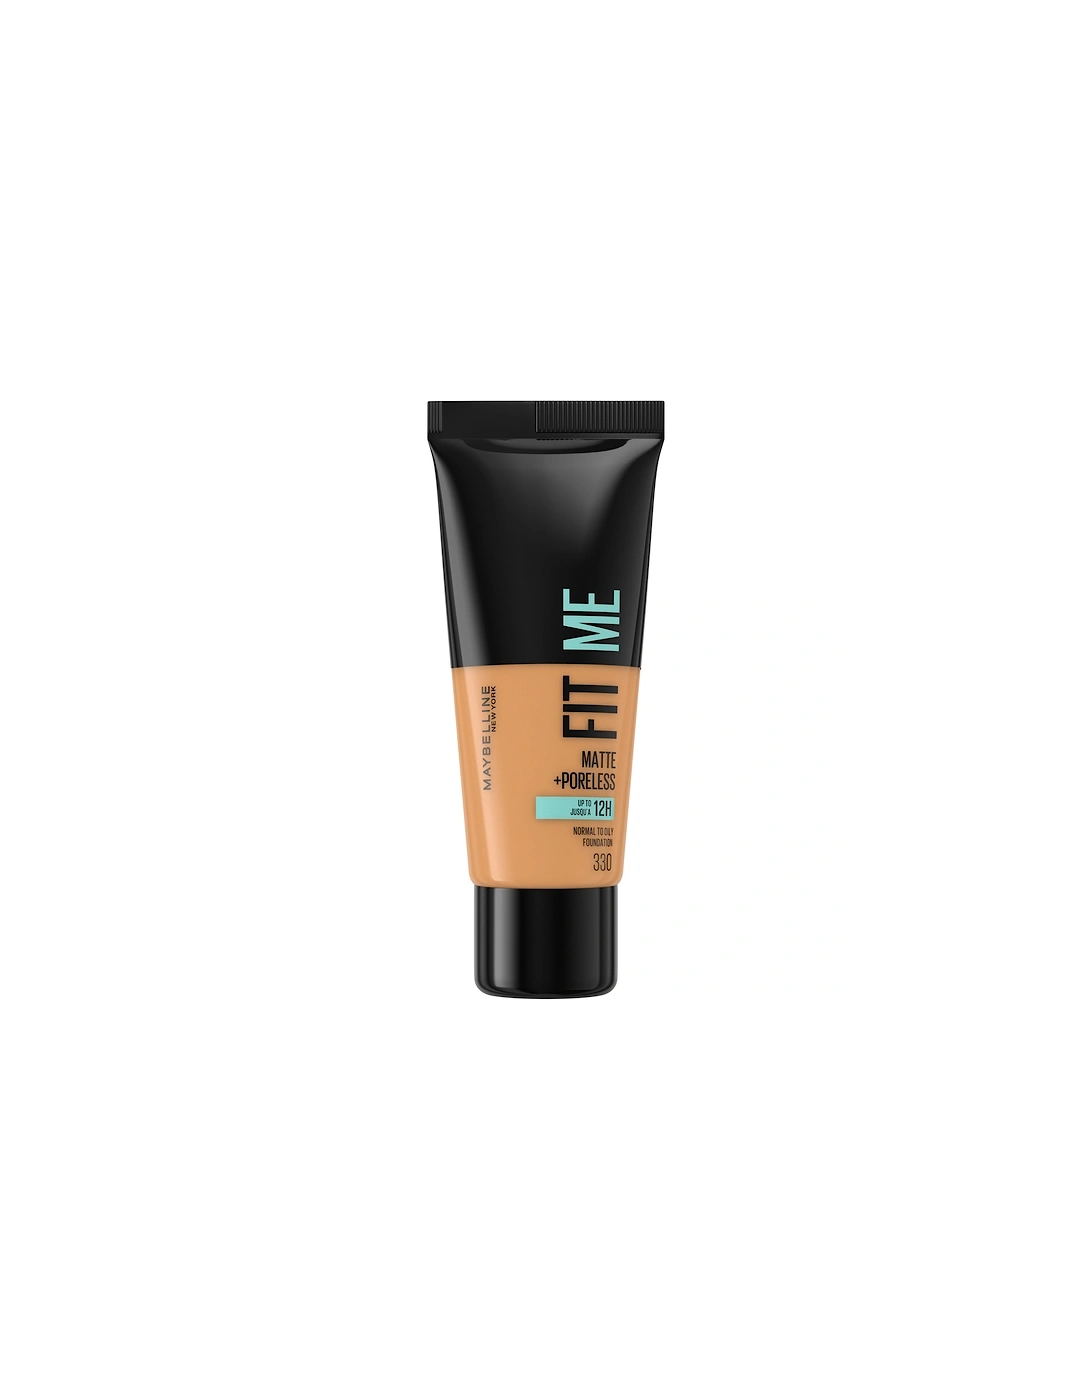 Fit Me! Matte and Poreless Foundation - 330 Toffee - - Fit Me! Matte and Poreless Foundation 30ml (Various Shades) - Foundation - Fit Me! Matte and Poreless Foundation 30ml (Various Shades) - Tina - Fit Me! Matte and Poreless Foundation 30ml (Various Shades) - Jo, 2 of 1